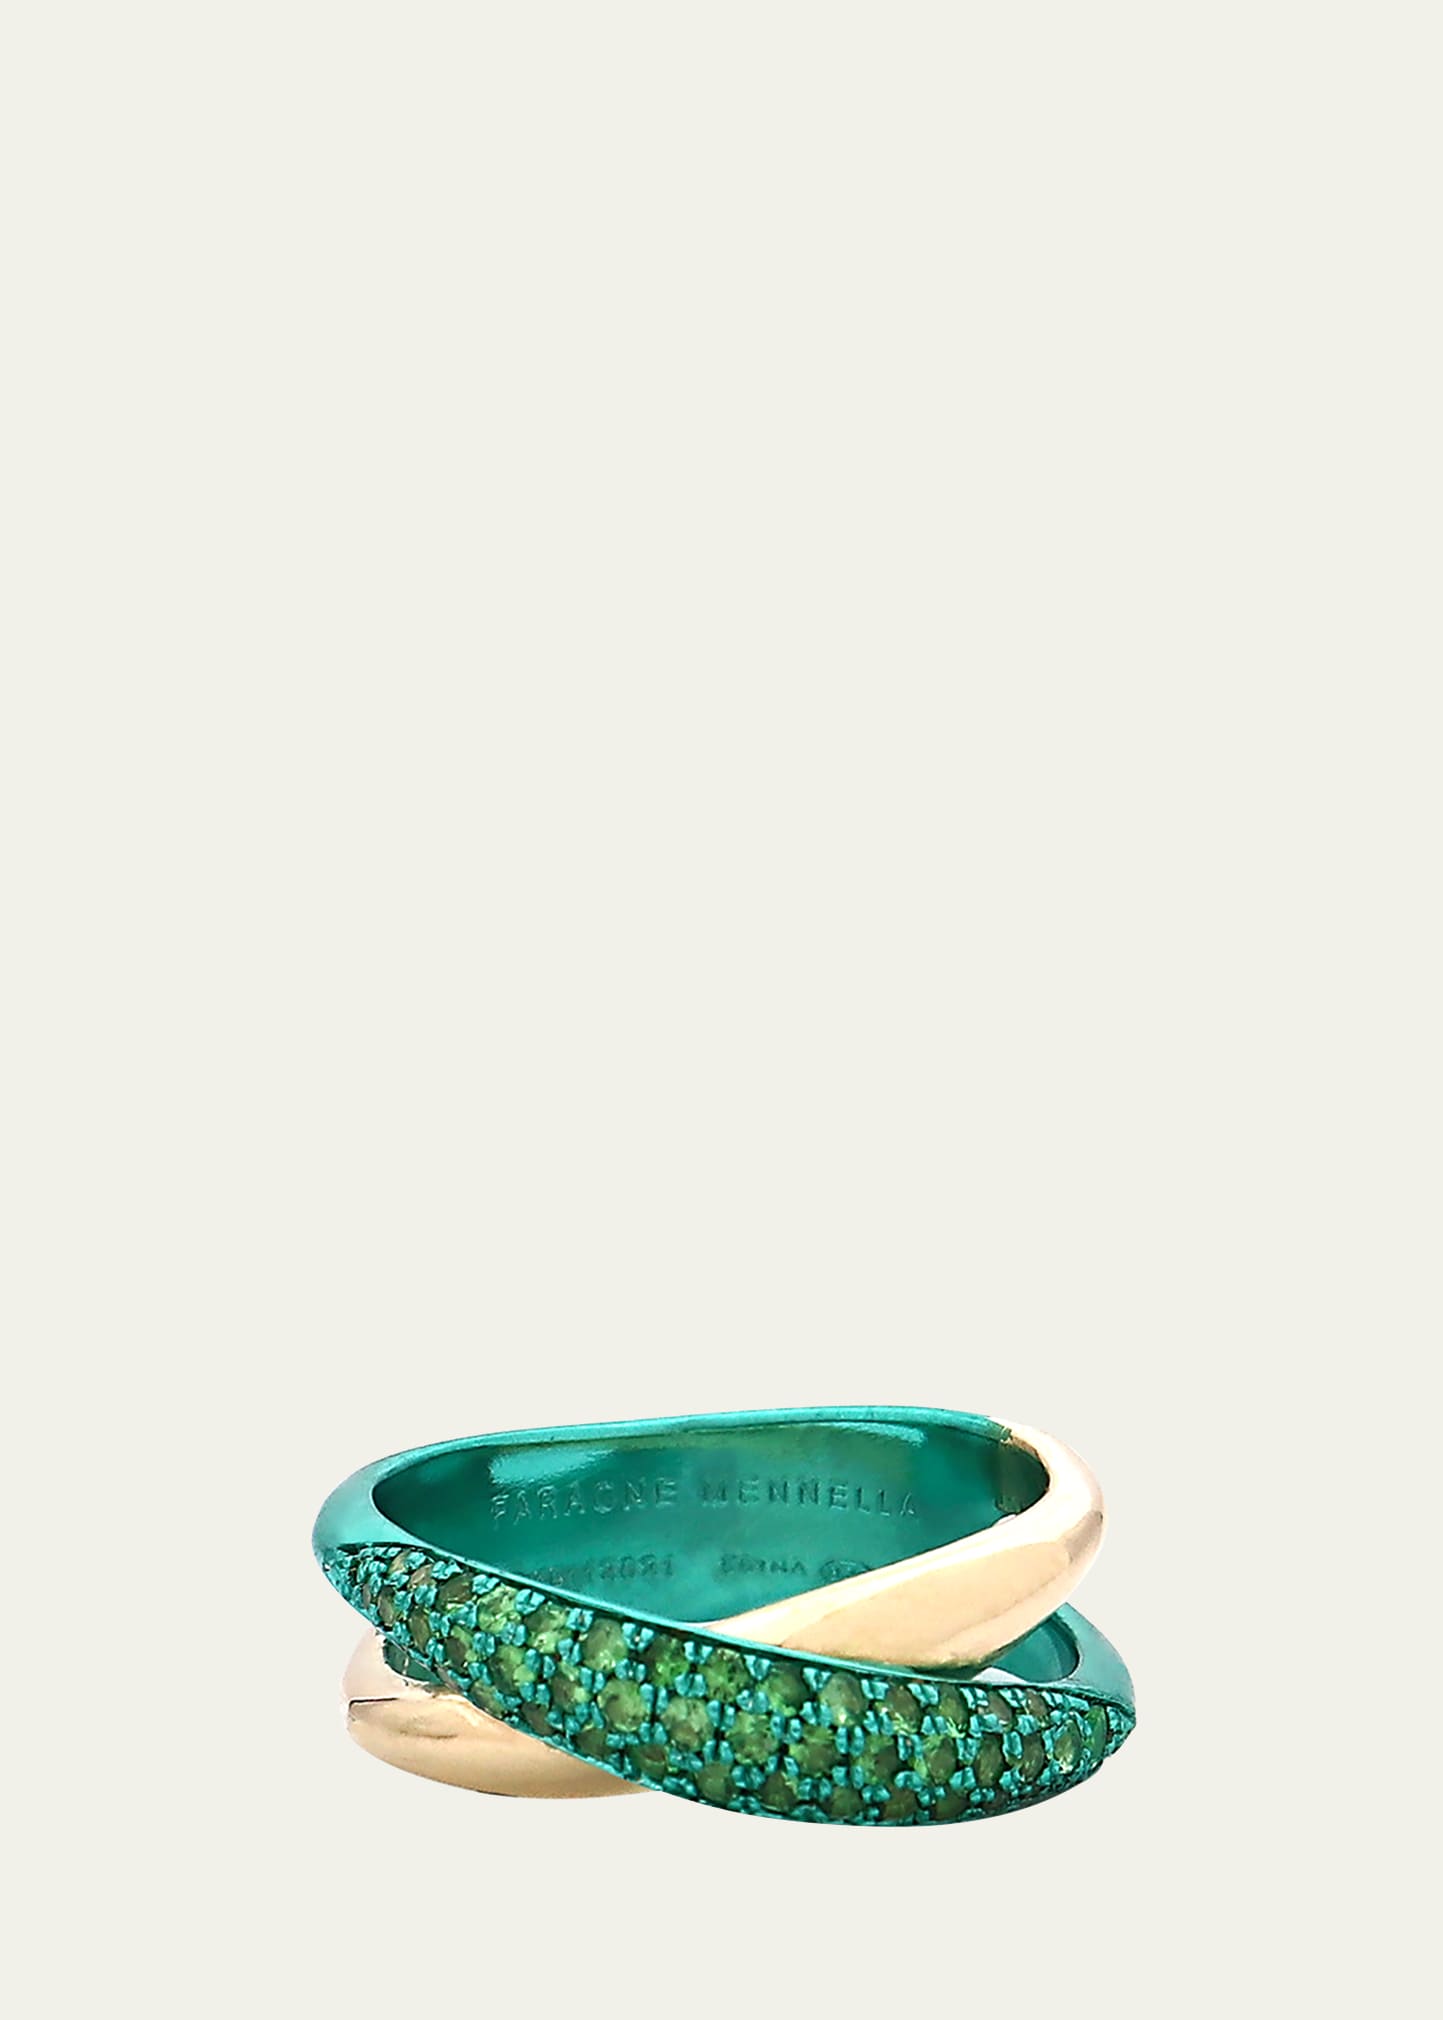 Margaux Ring in 18K Gold, Sterling Silver and Tsavorites